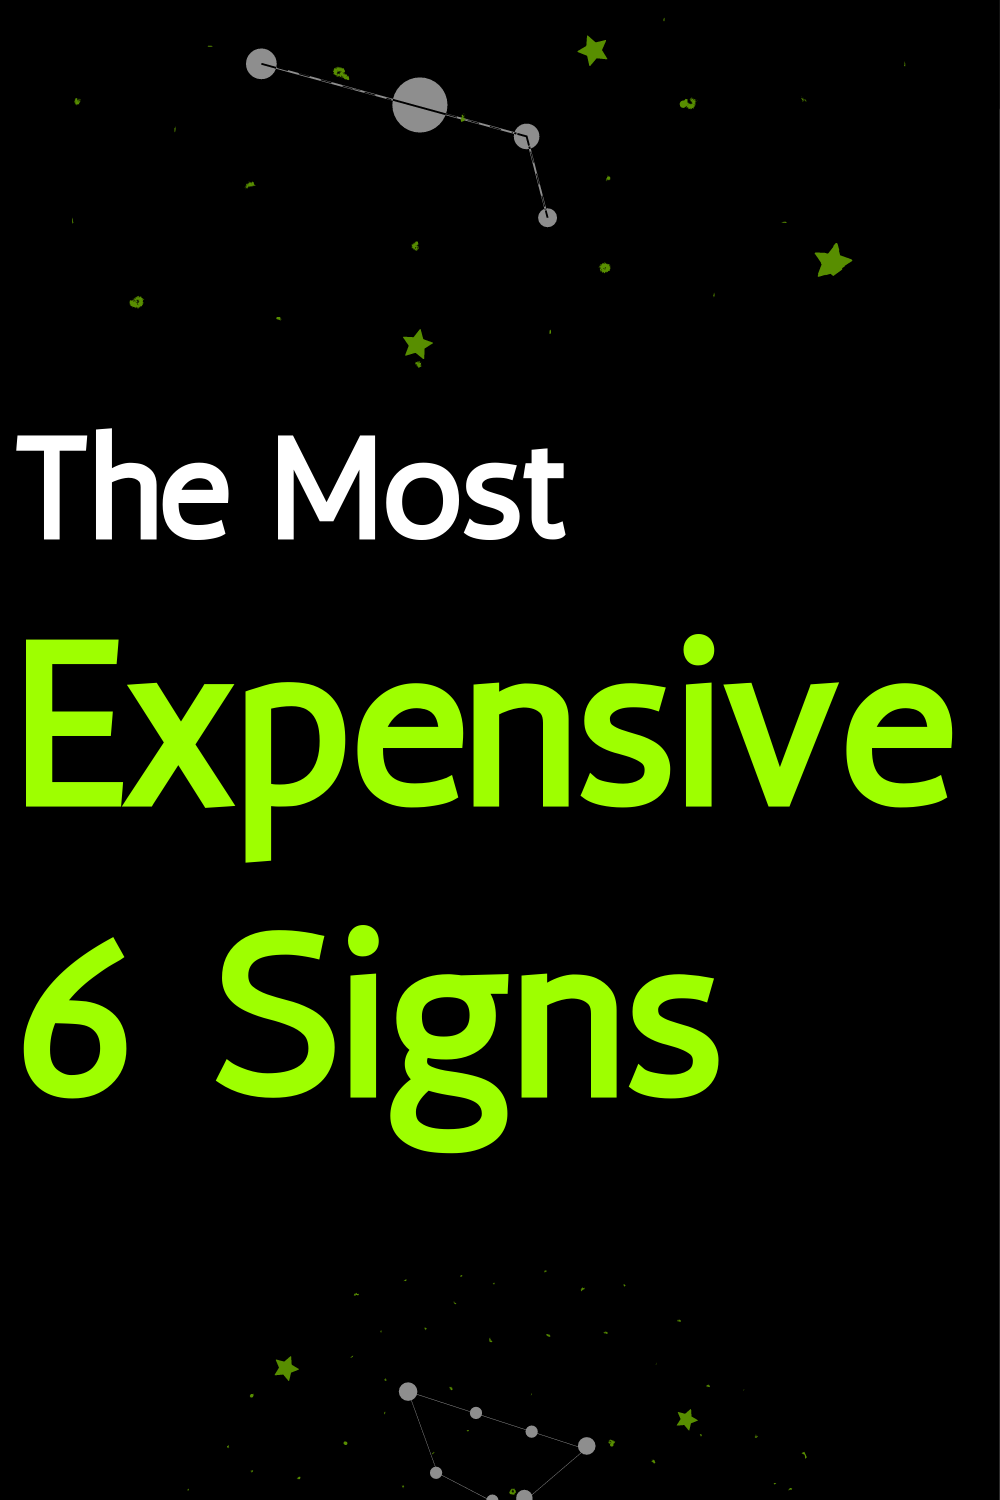 The Most Expensive 6 Signs